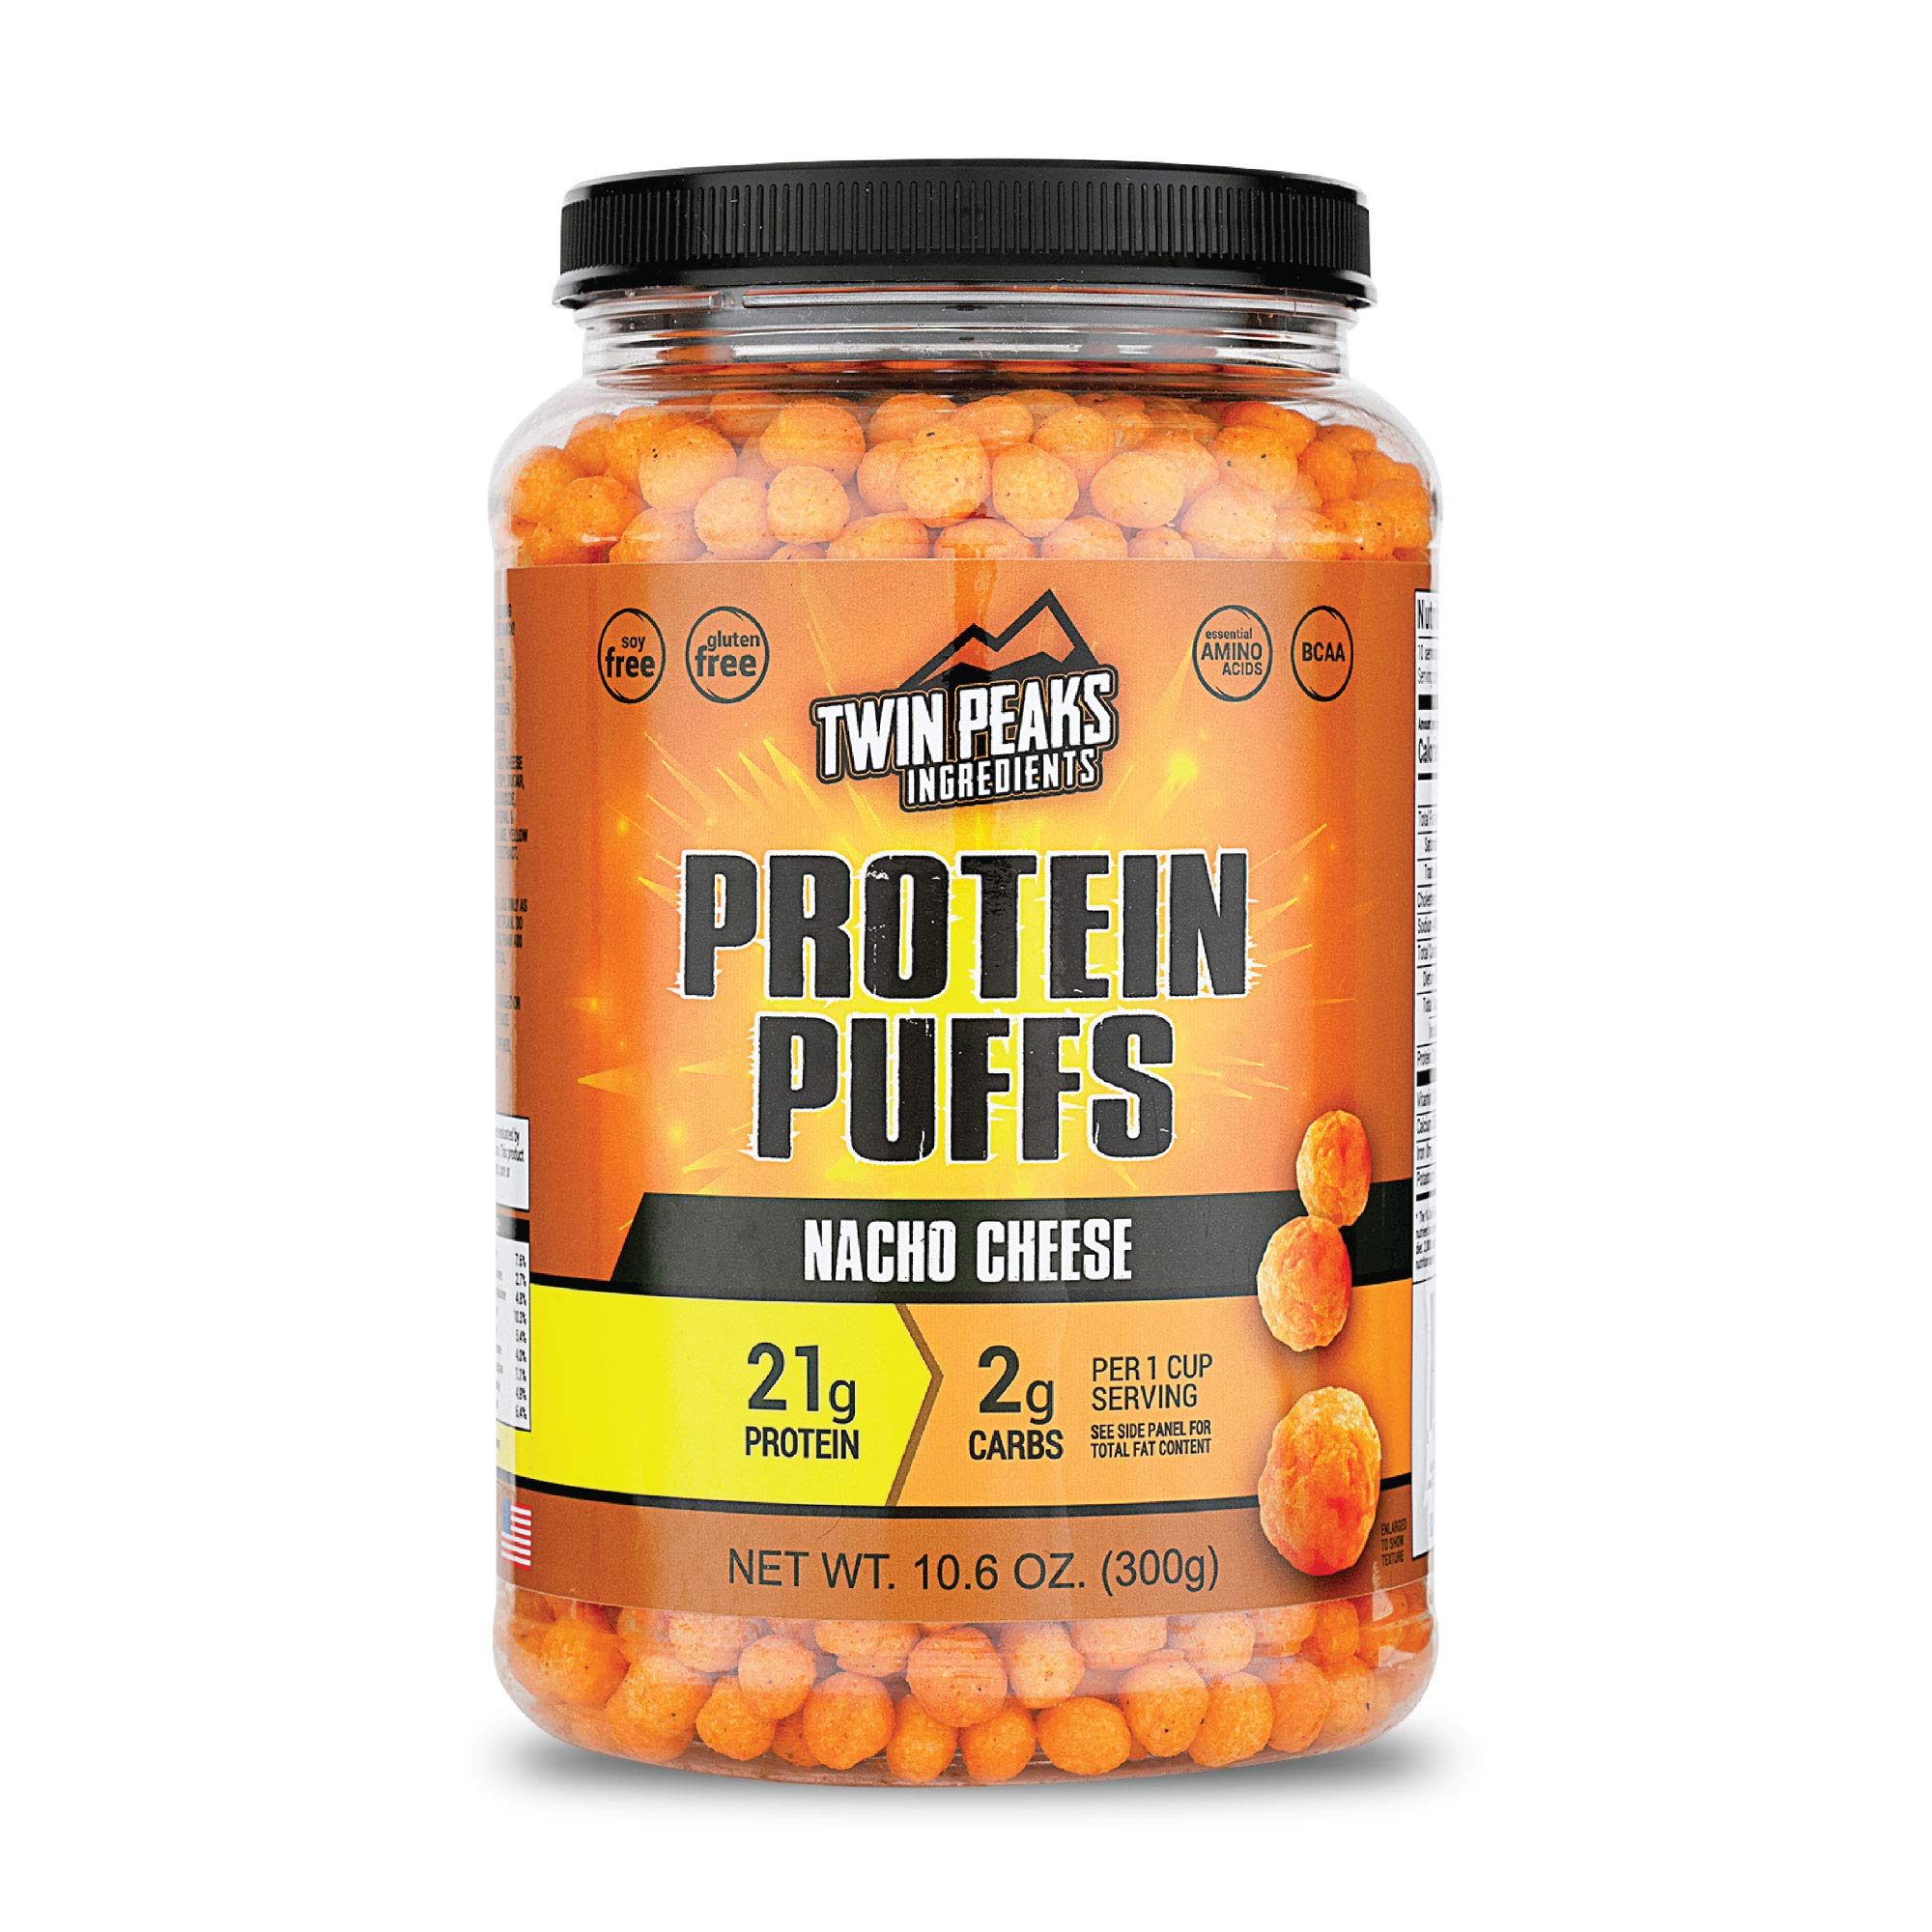 Twin Peaks Low Carb, Keto Friendly Protein Puffs, 3 Bags of Jalapeno Cheddar Flavor Puffs + 1 Jug Nacho Cheese Flavor Puffs